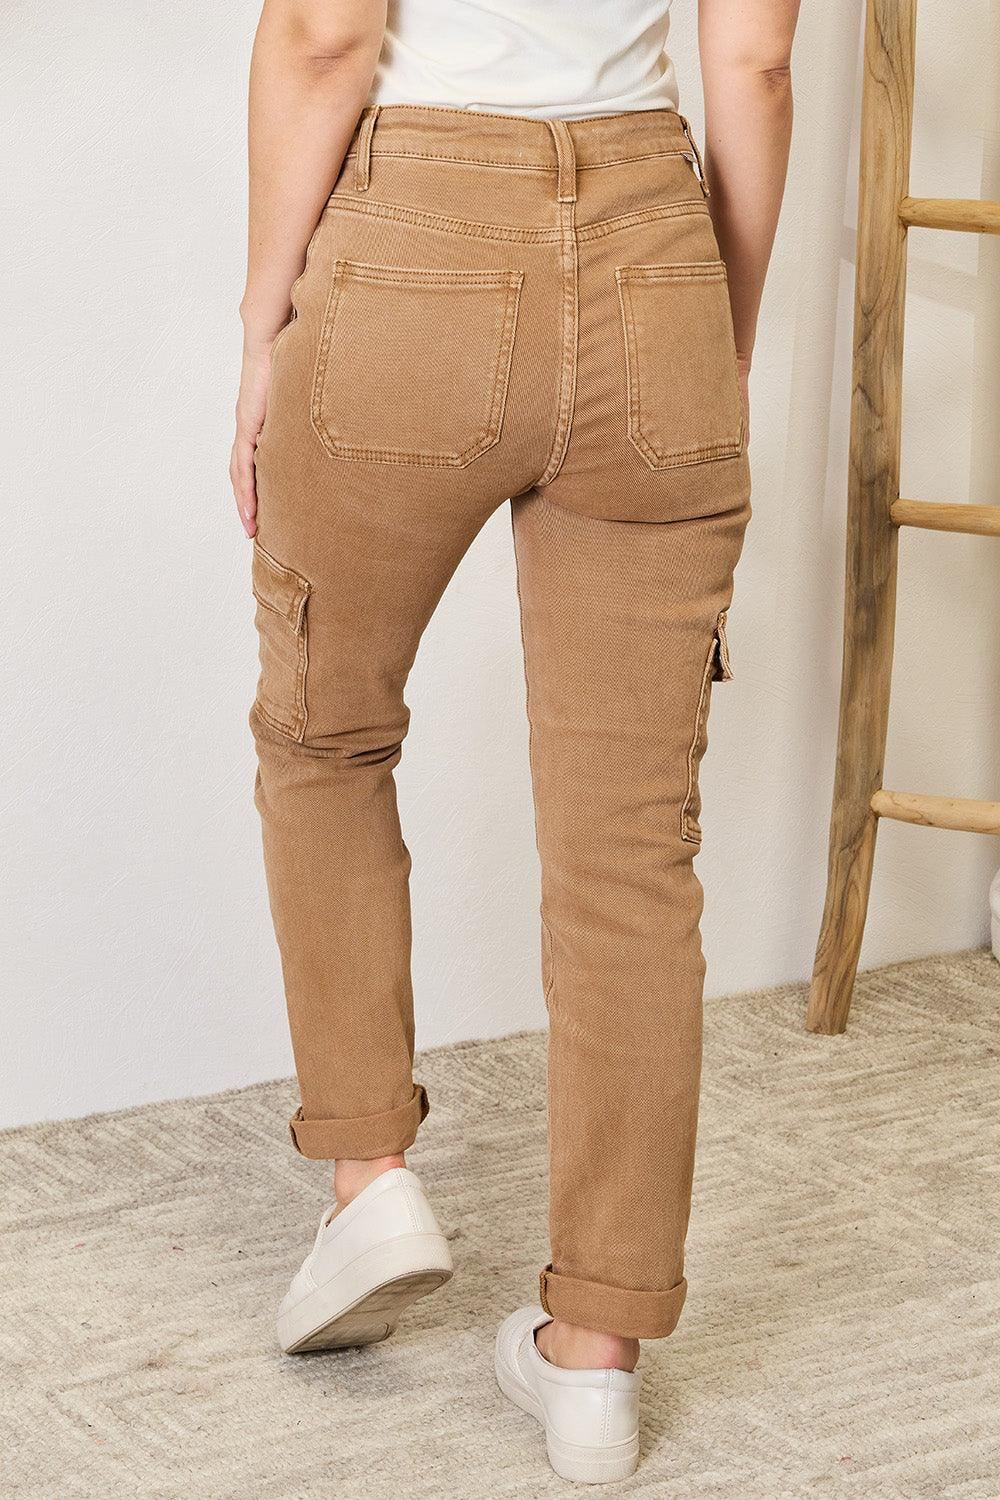 Risen Cargo Ankle Jeans - Cocoa - Inspired Eye Boutique